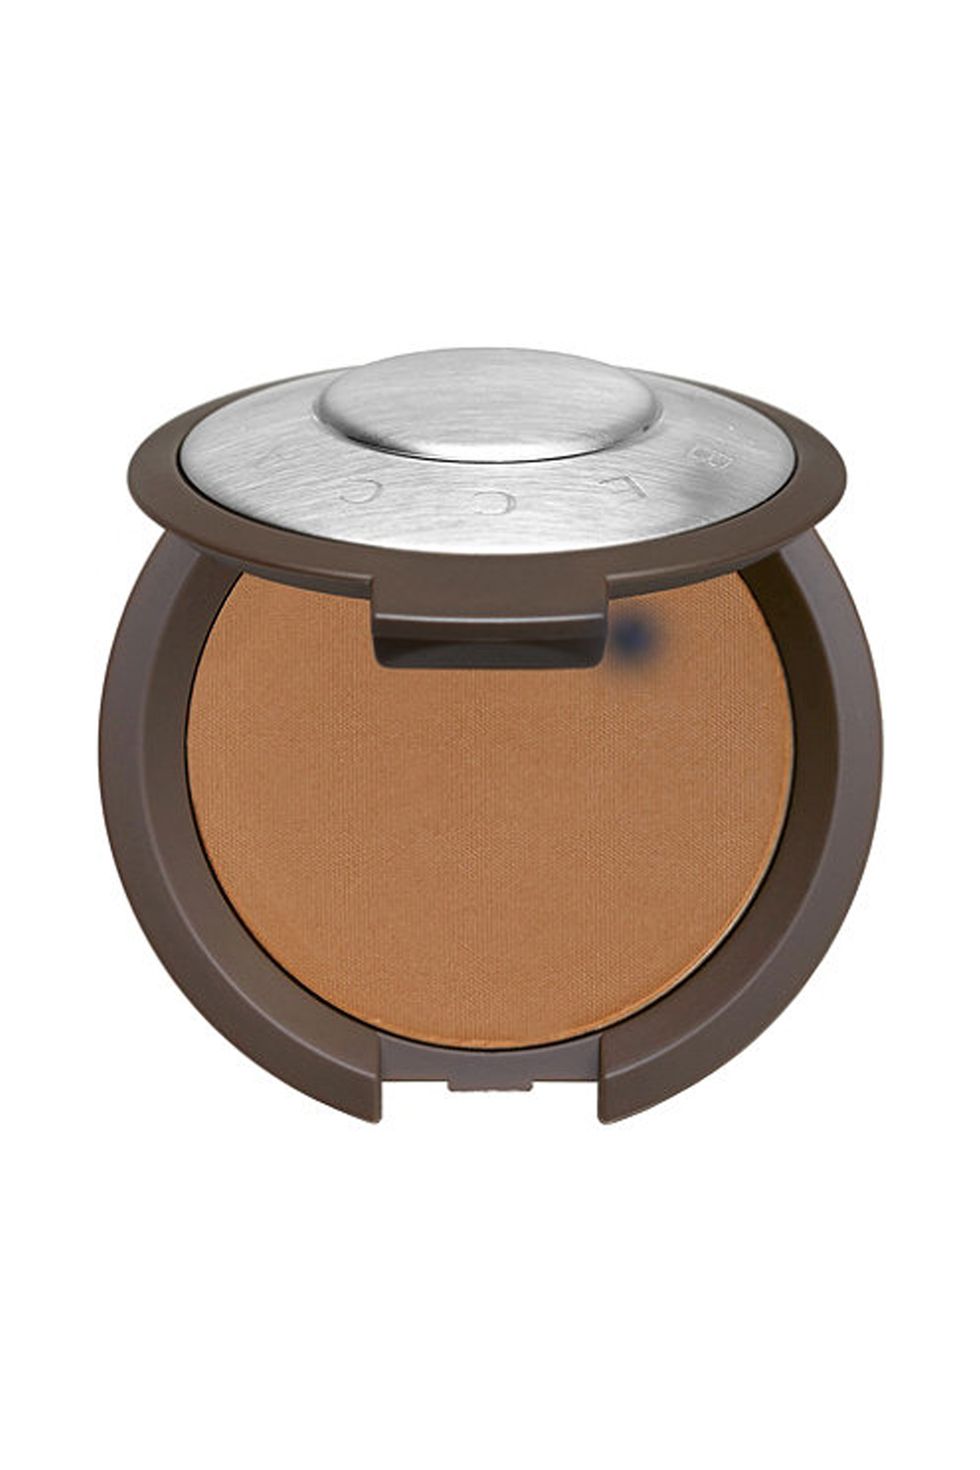 <p>For the times when you can't find the perfect palette, Ashley Graham's makeup artist Samuel Paul suggests building your own. "My favorite contour product is the BECCA Cosmetics Multi-Tasking Perfecting Powder. For contouring choose a powder that is one or two shades darker than your natural skin tone."</p><p>BECCA Cosmetics Multi-Tasking Perfecting Powder, $34, <a href="http://www.ulta.com/multi-tasking-perfecting-powder?productId=xlsImpprod14571037"><u data-redactor-tag="u">Ulta.com</u></a></p>